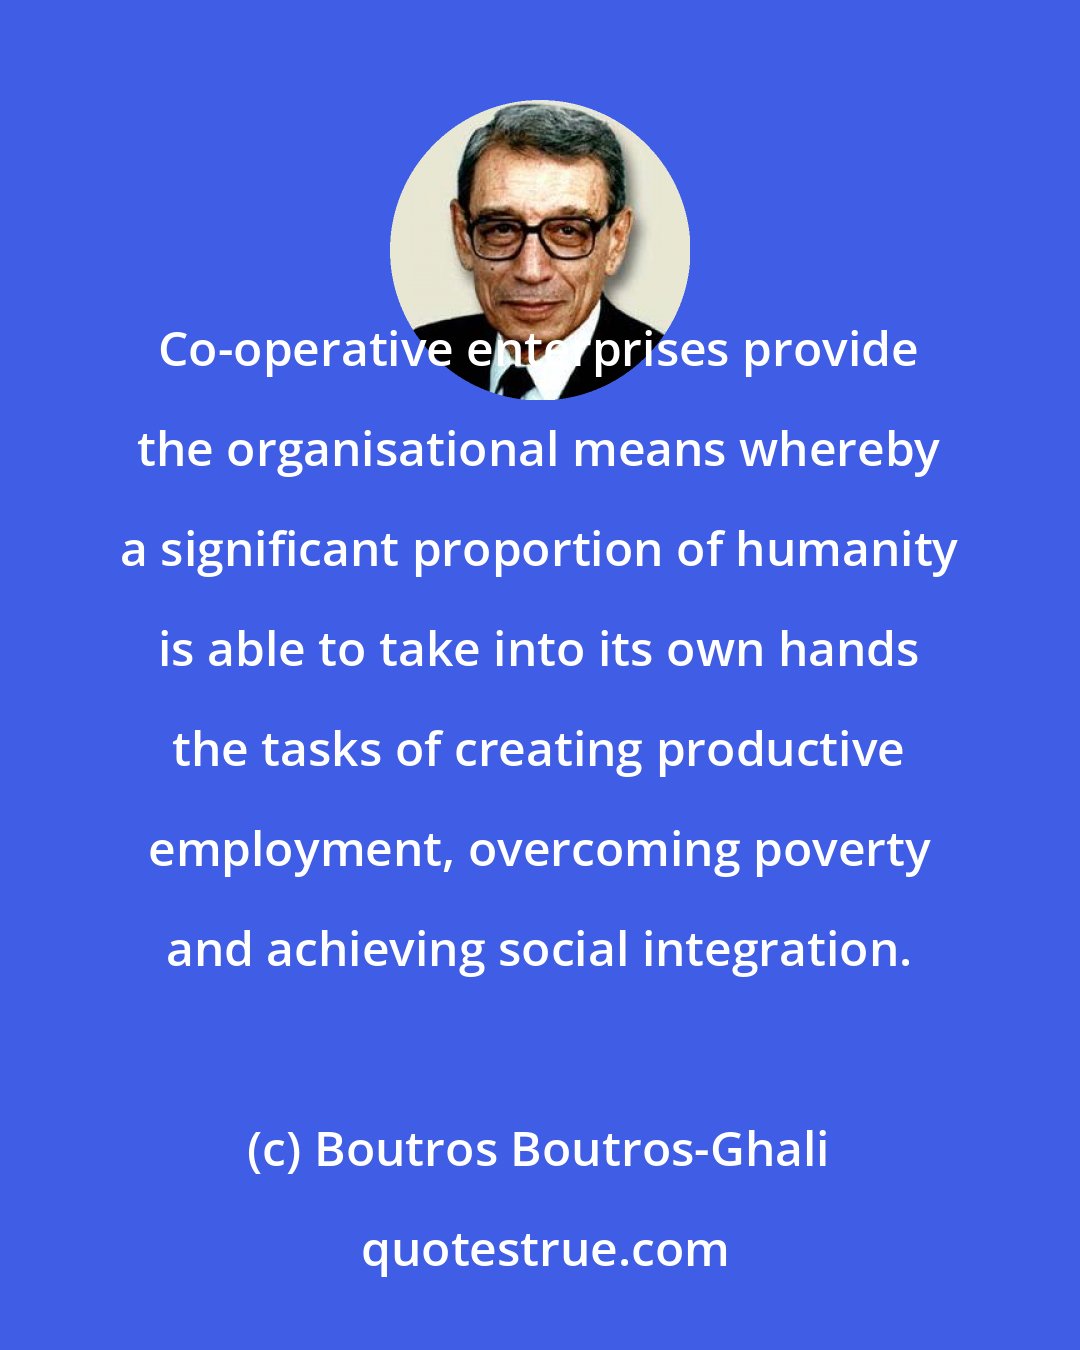 Boutros Boutros-Ghali: Co-operative enterprises provide the organisational means whereby a significant proportion of humanity is able to take into its own hands the tasks of creating productive employment, overcoming poverty and achieving social integration.